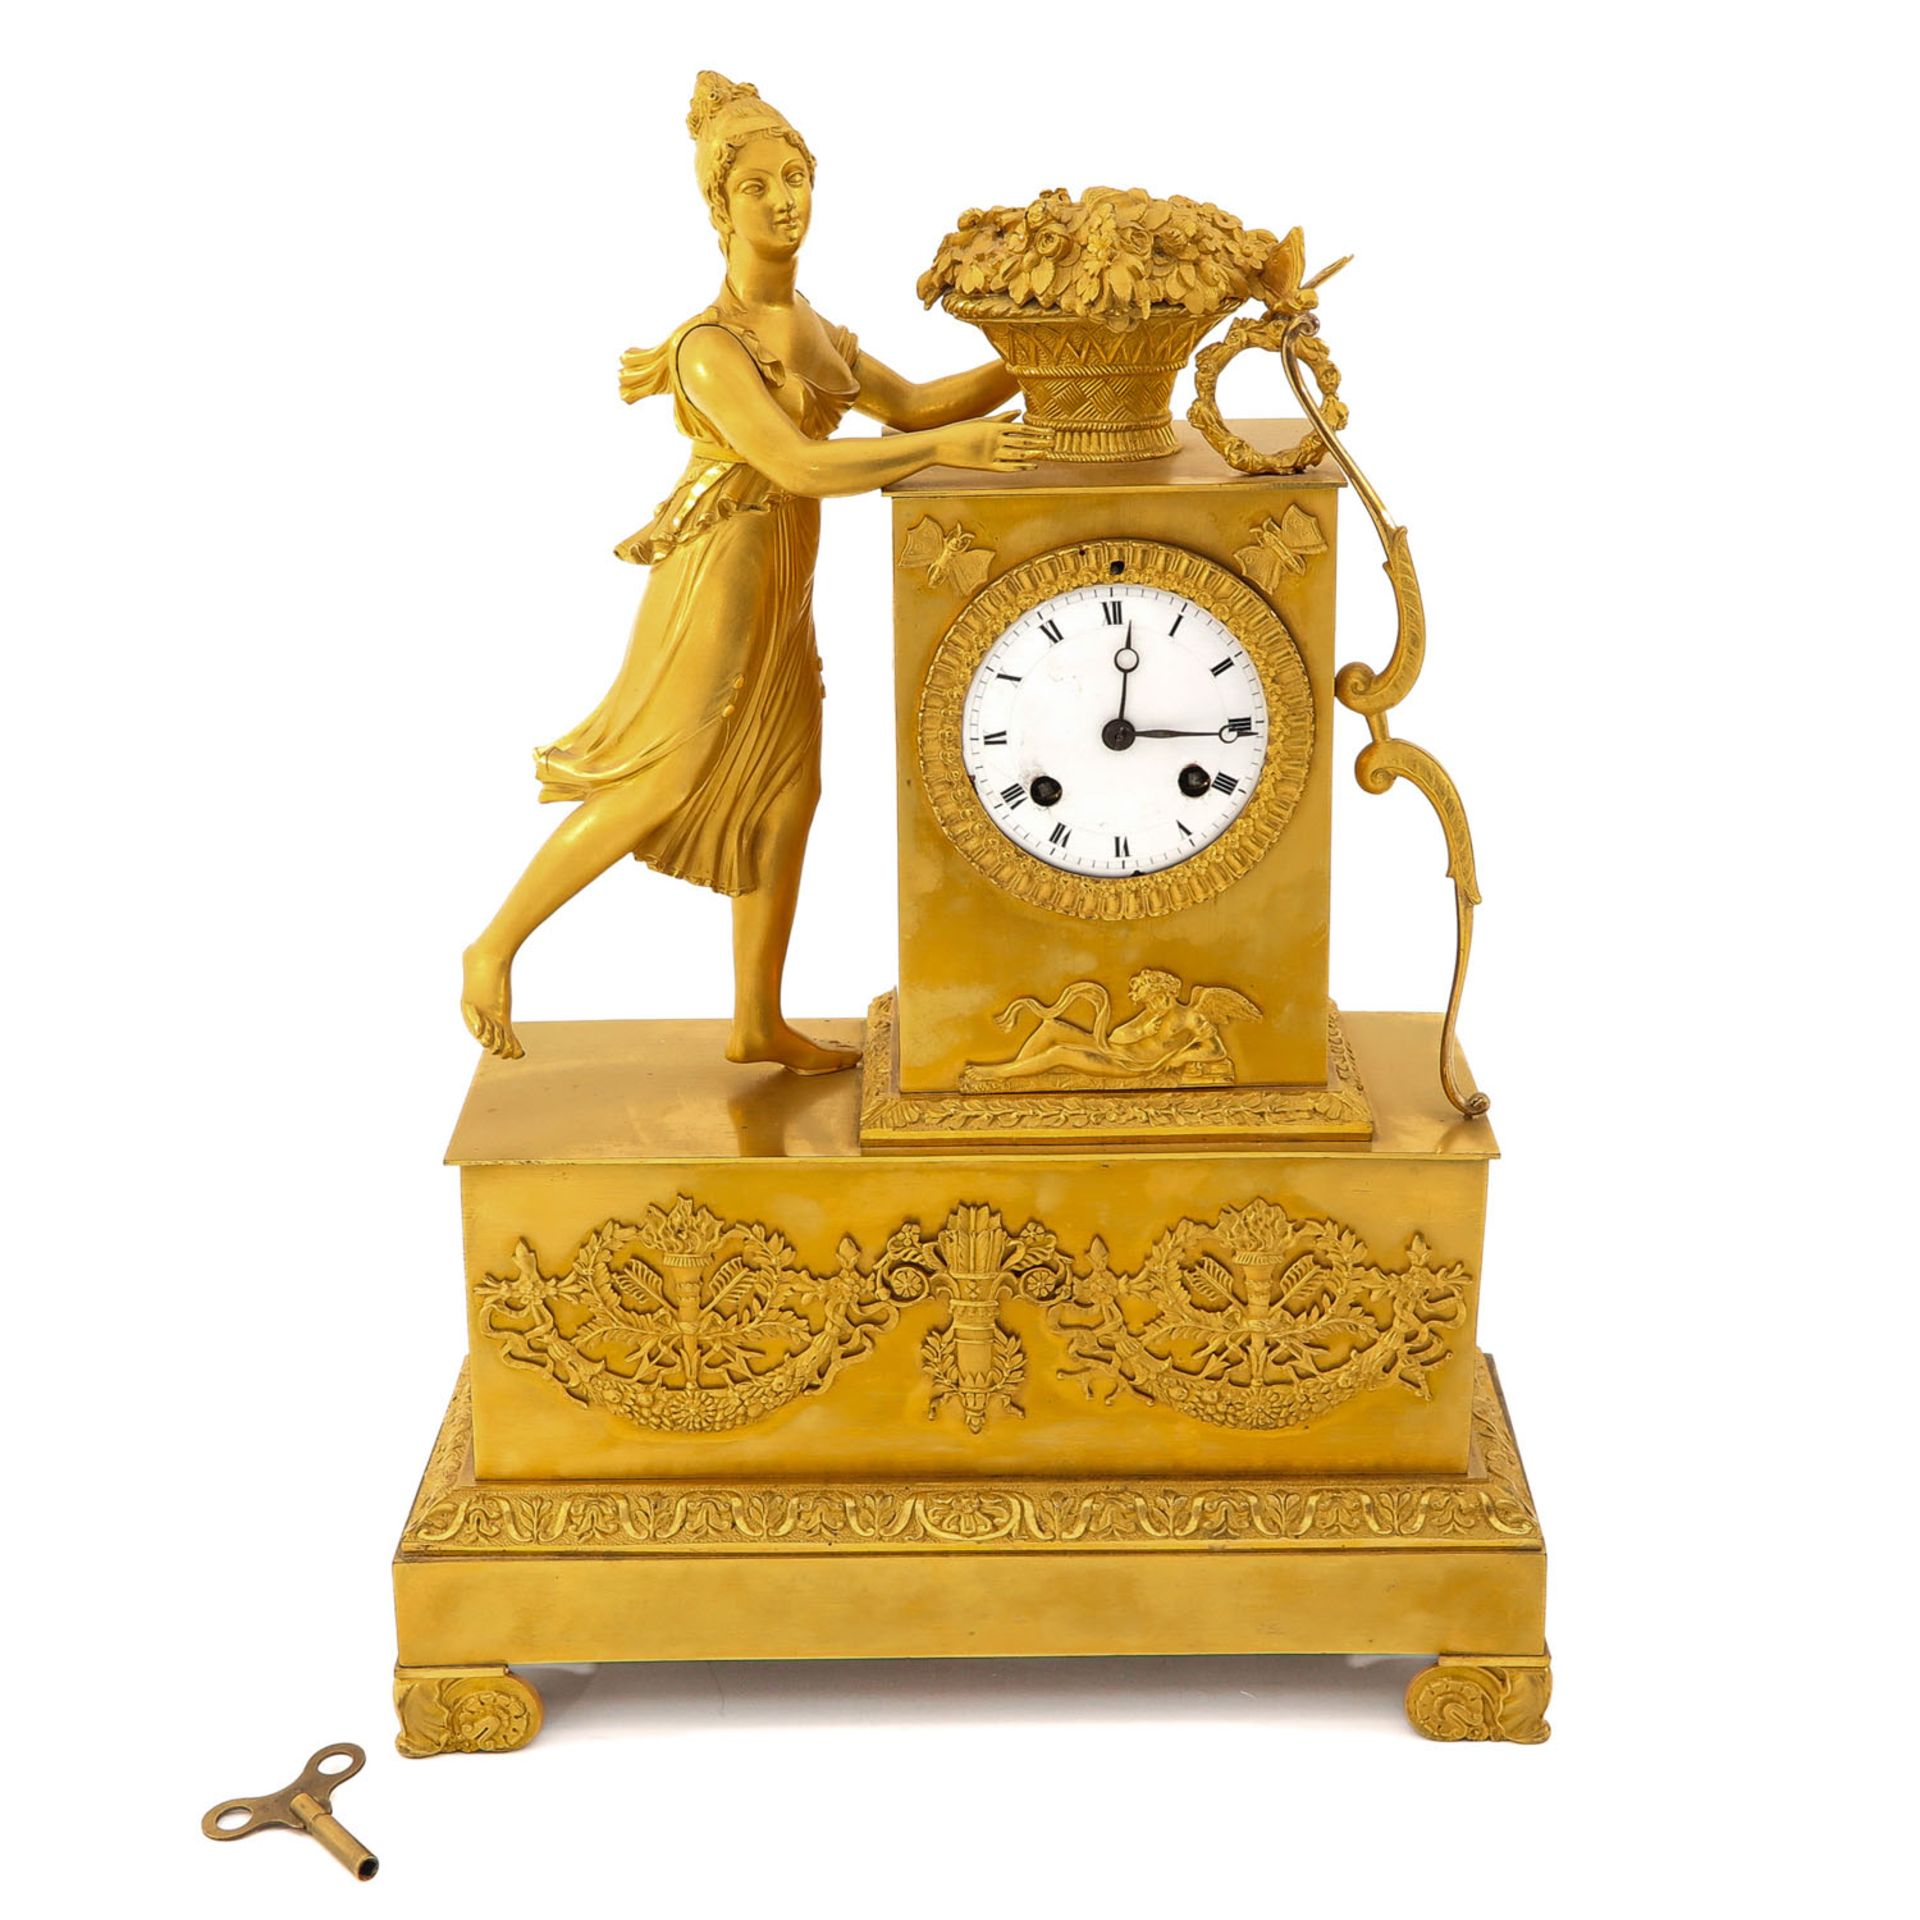 A Fire Gilt French Pendule